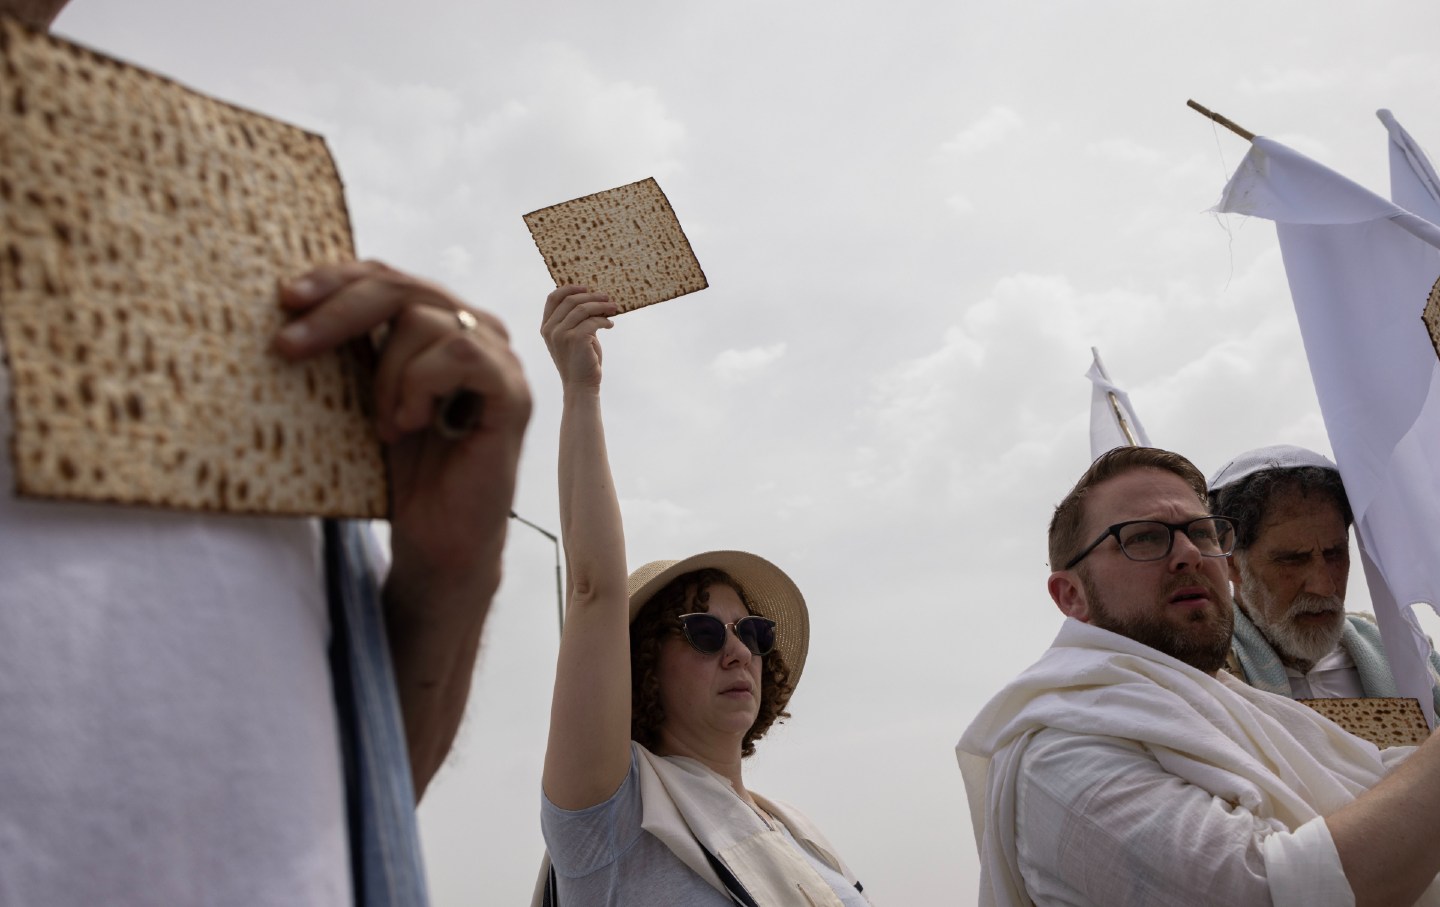 Activists with Rabbis for Ceasefire hold up pieces of matzah—symbols of Passover’s central imperative to “Let all who are hungry come and eat!”